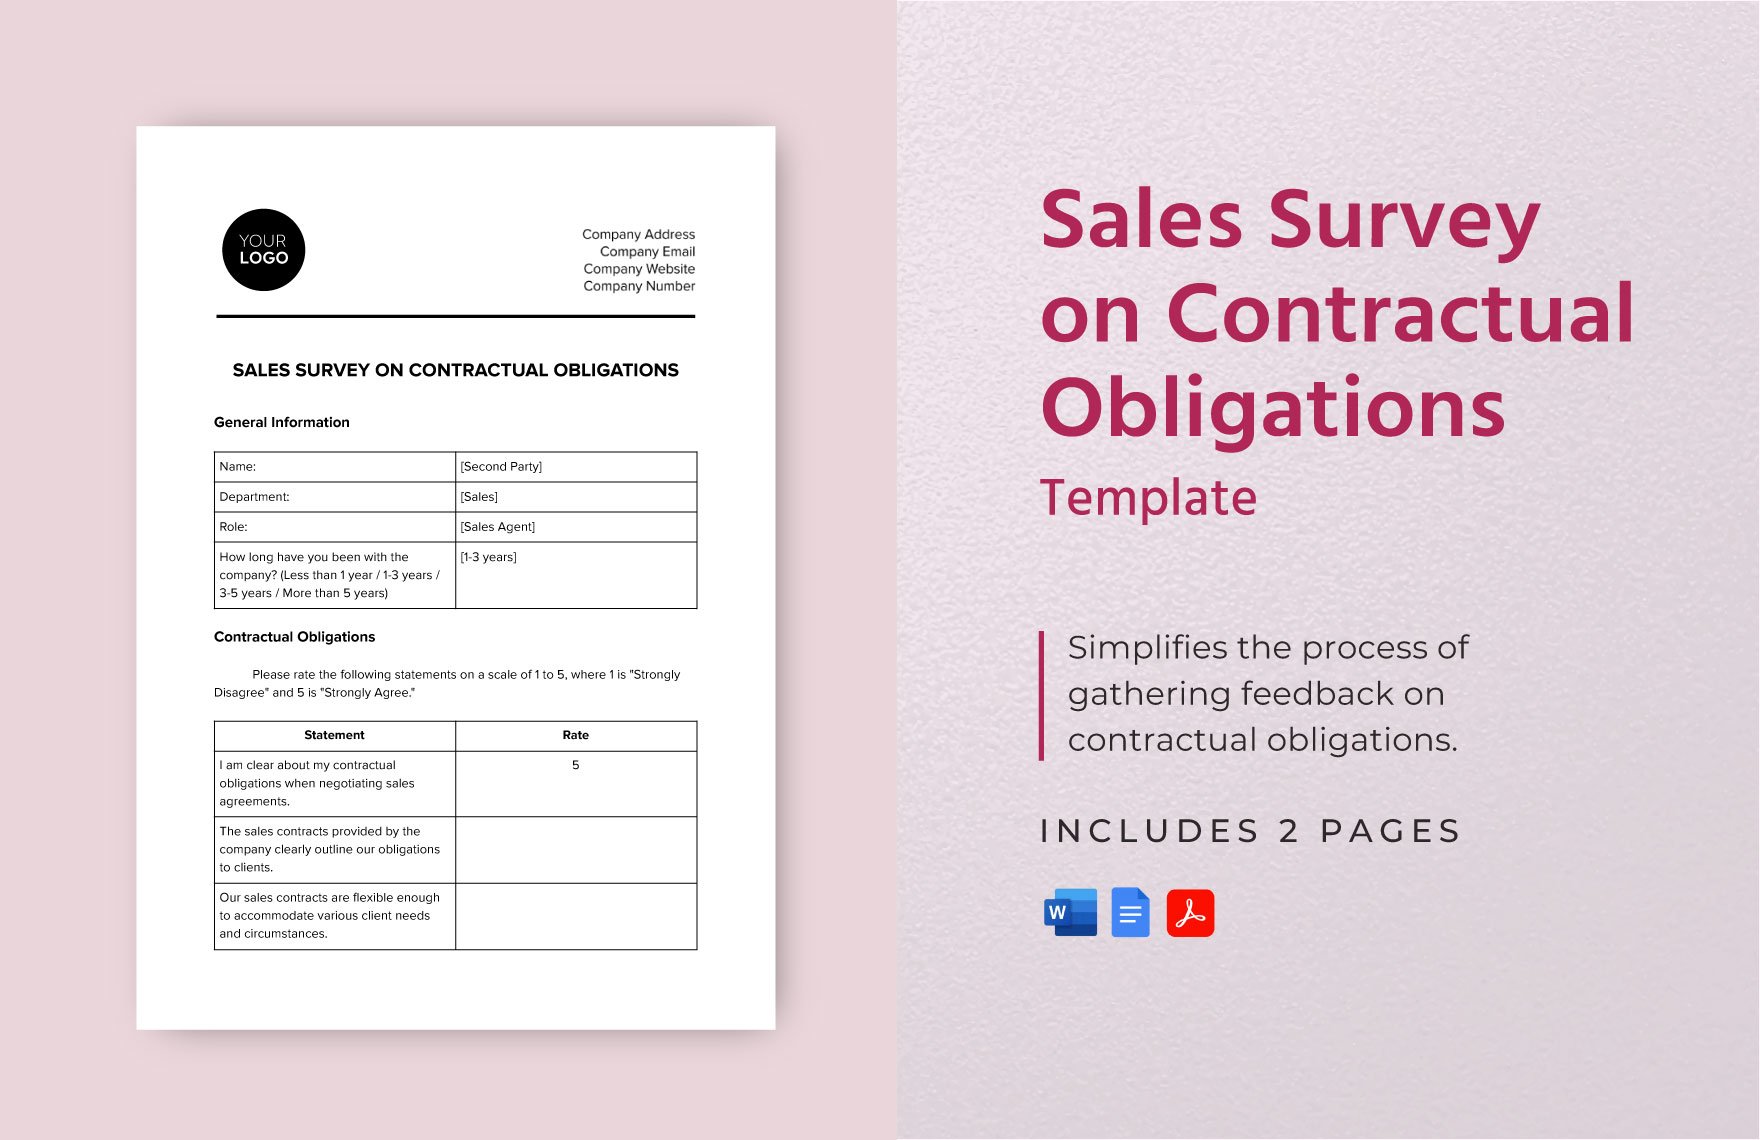 Sales Survey on Contractual Obligations Template in Word, Google Docs, PDF